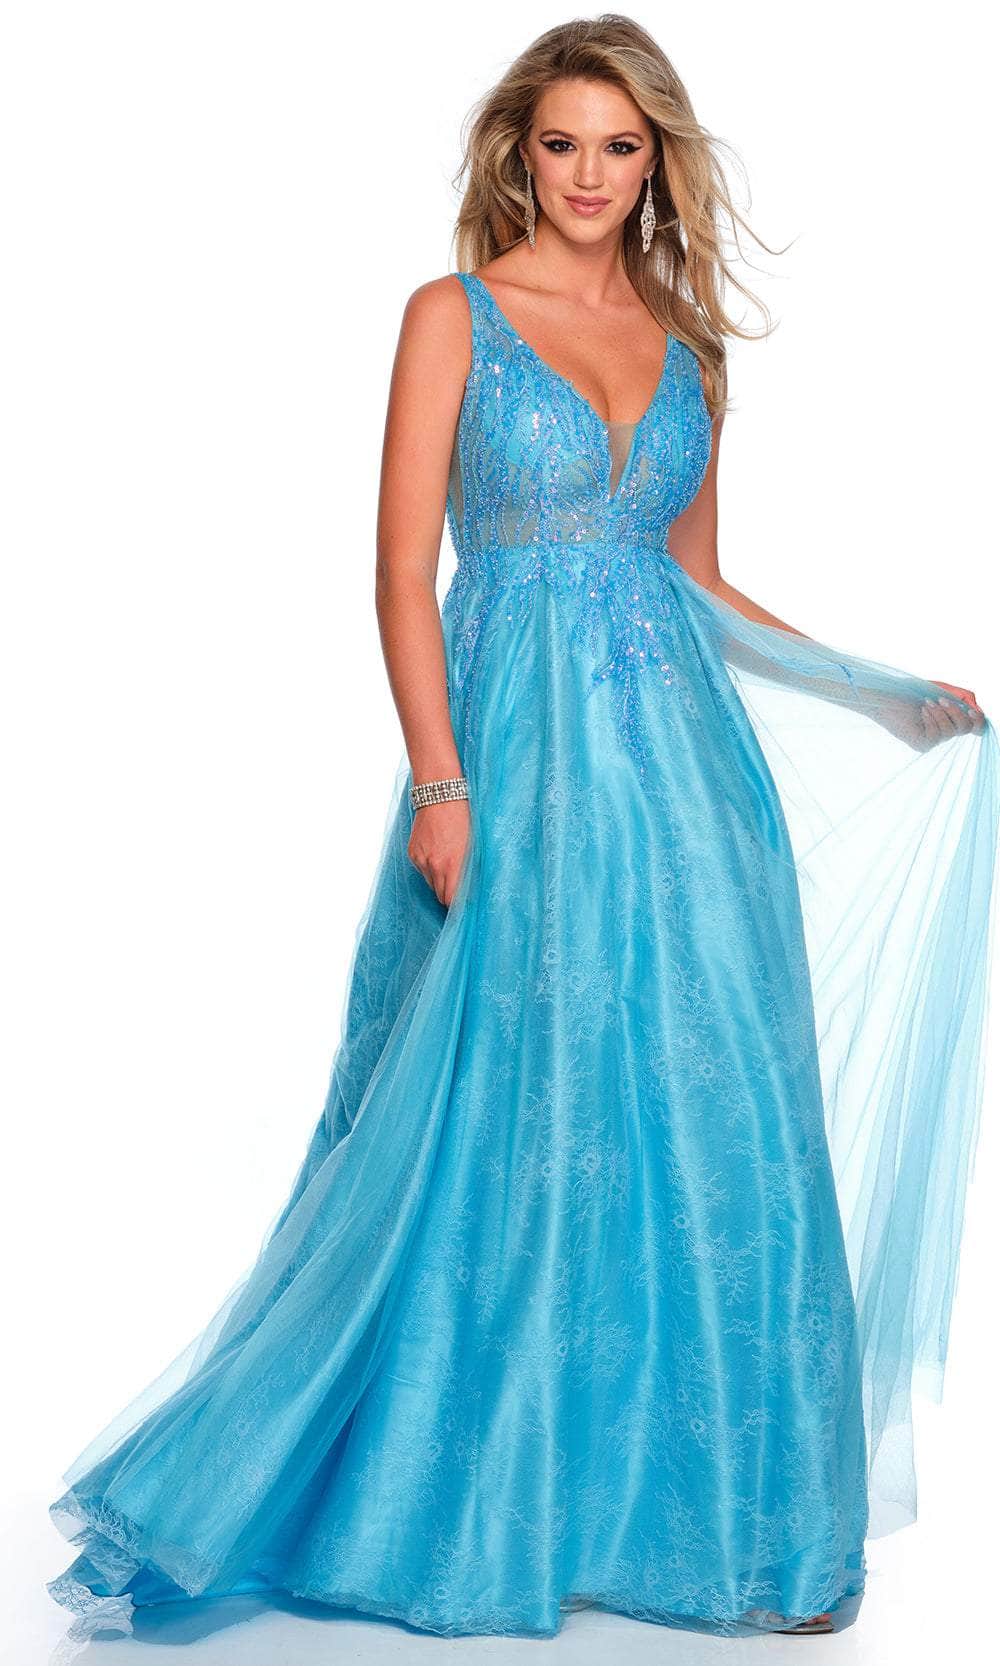 Image of Dave & Johnny 11377 - Embroidered Sleeveless Ball Gown